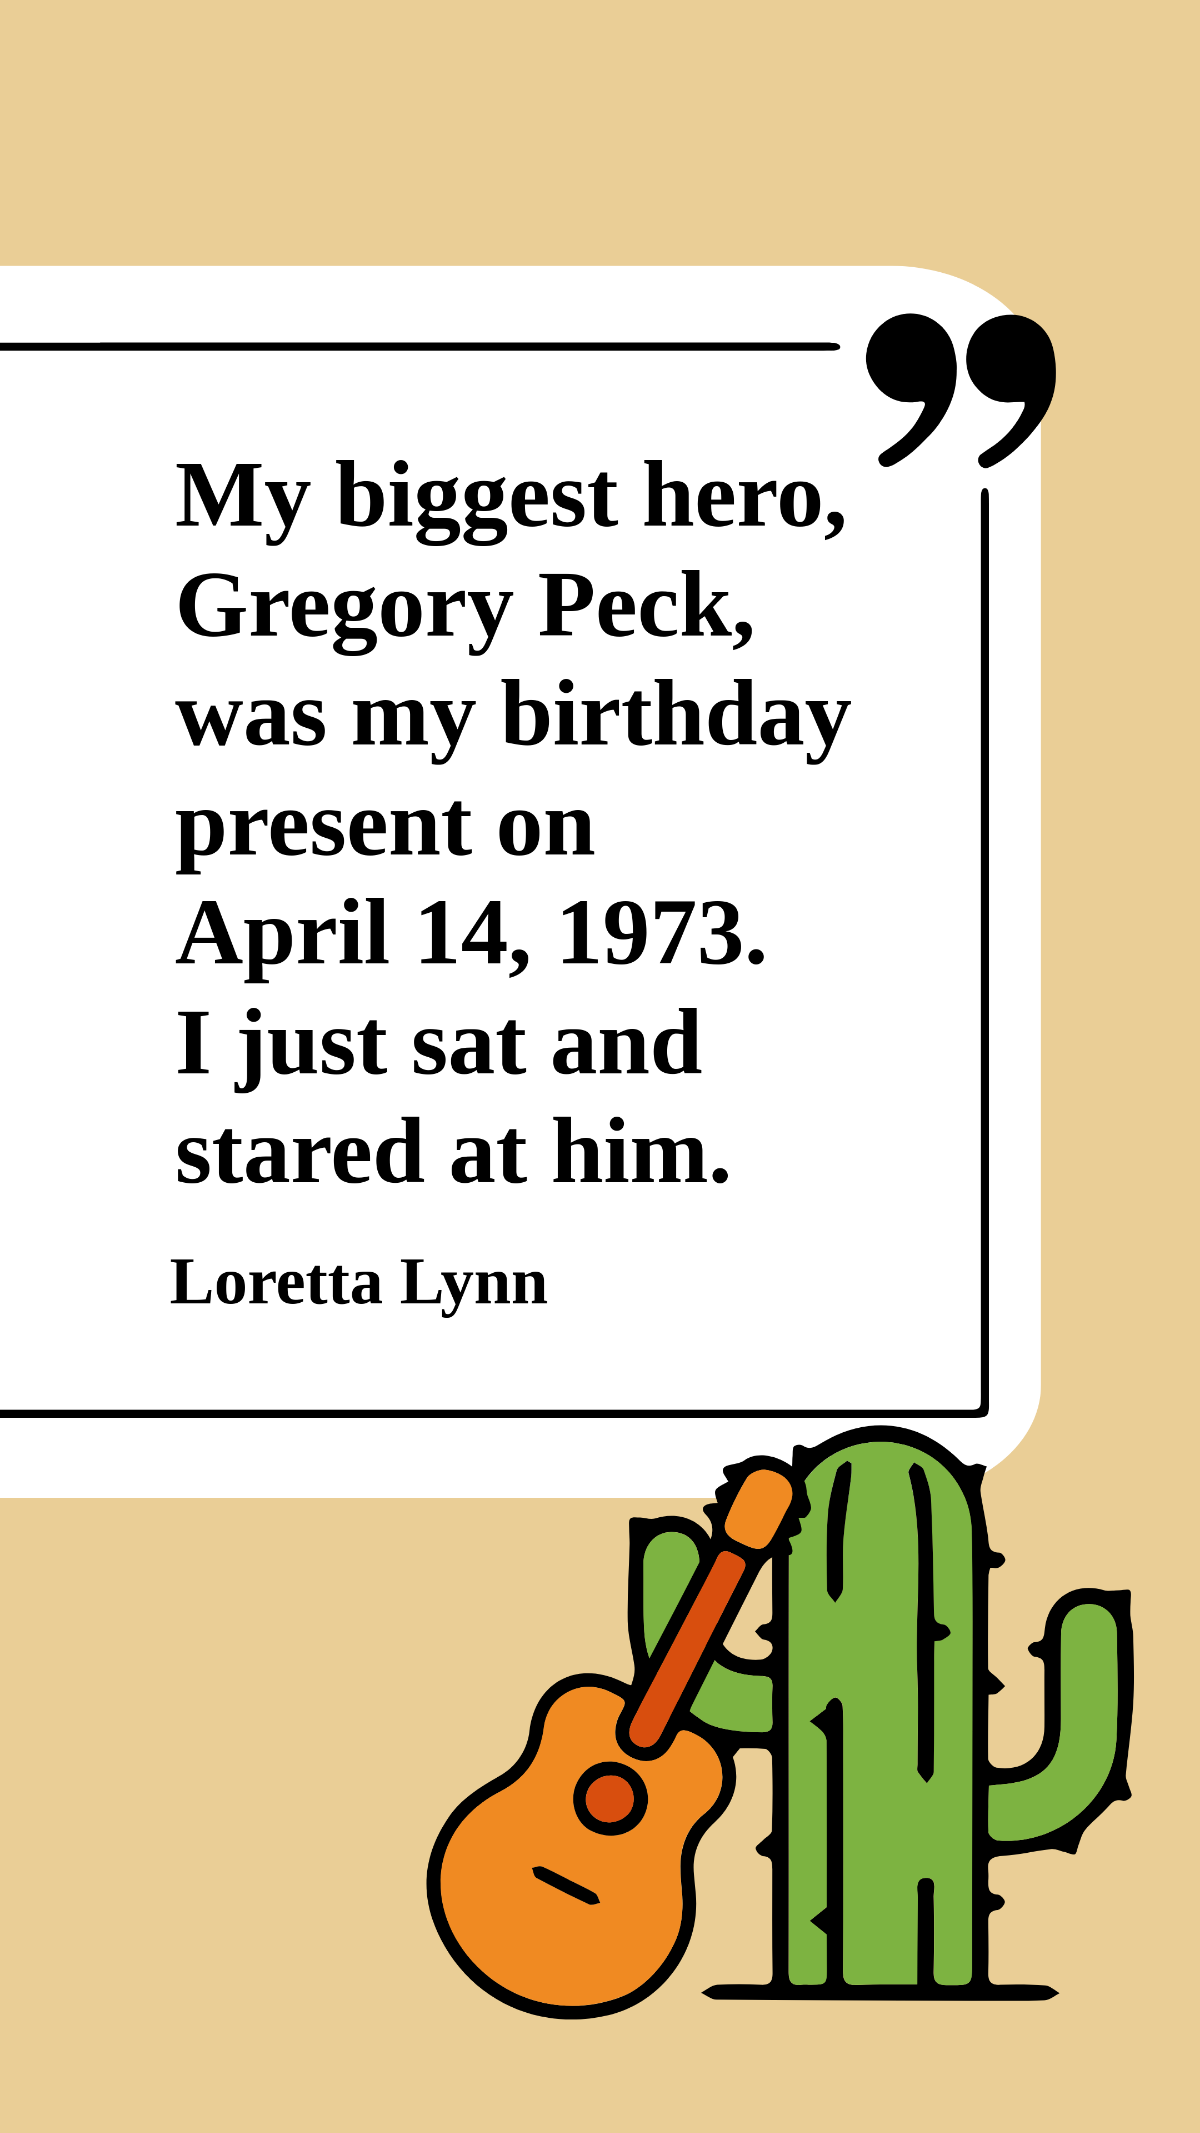 Loretta Lynn - My biggest hero, Gregory Peck, was my birthday present on April 14, 1973. I just sat and stared at him.